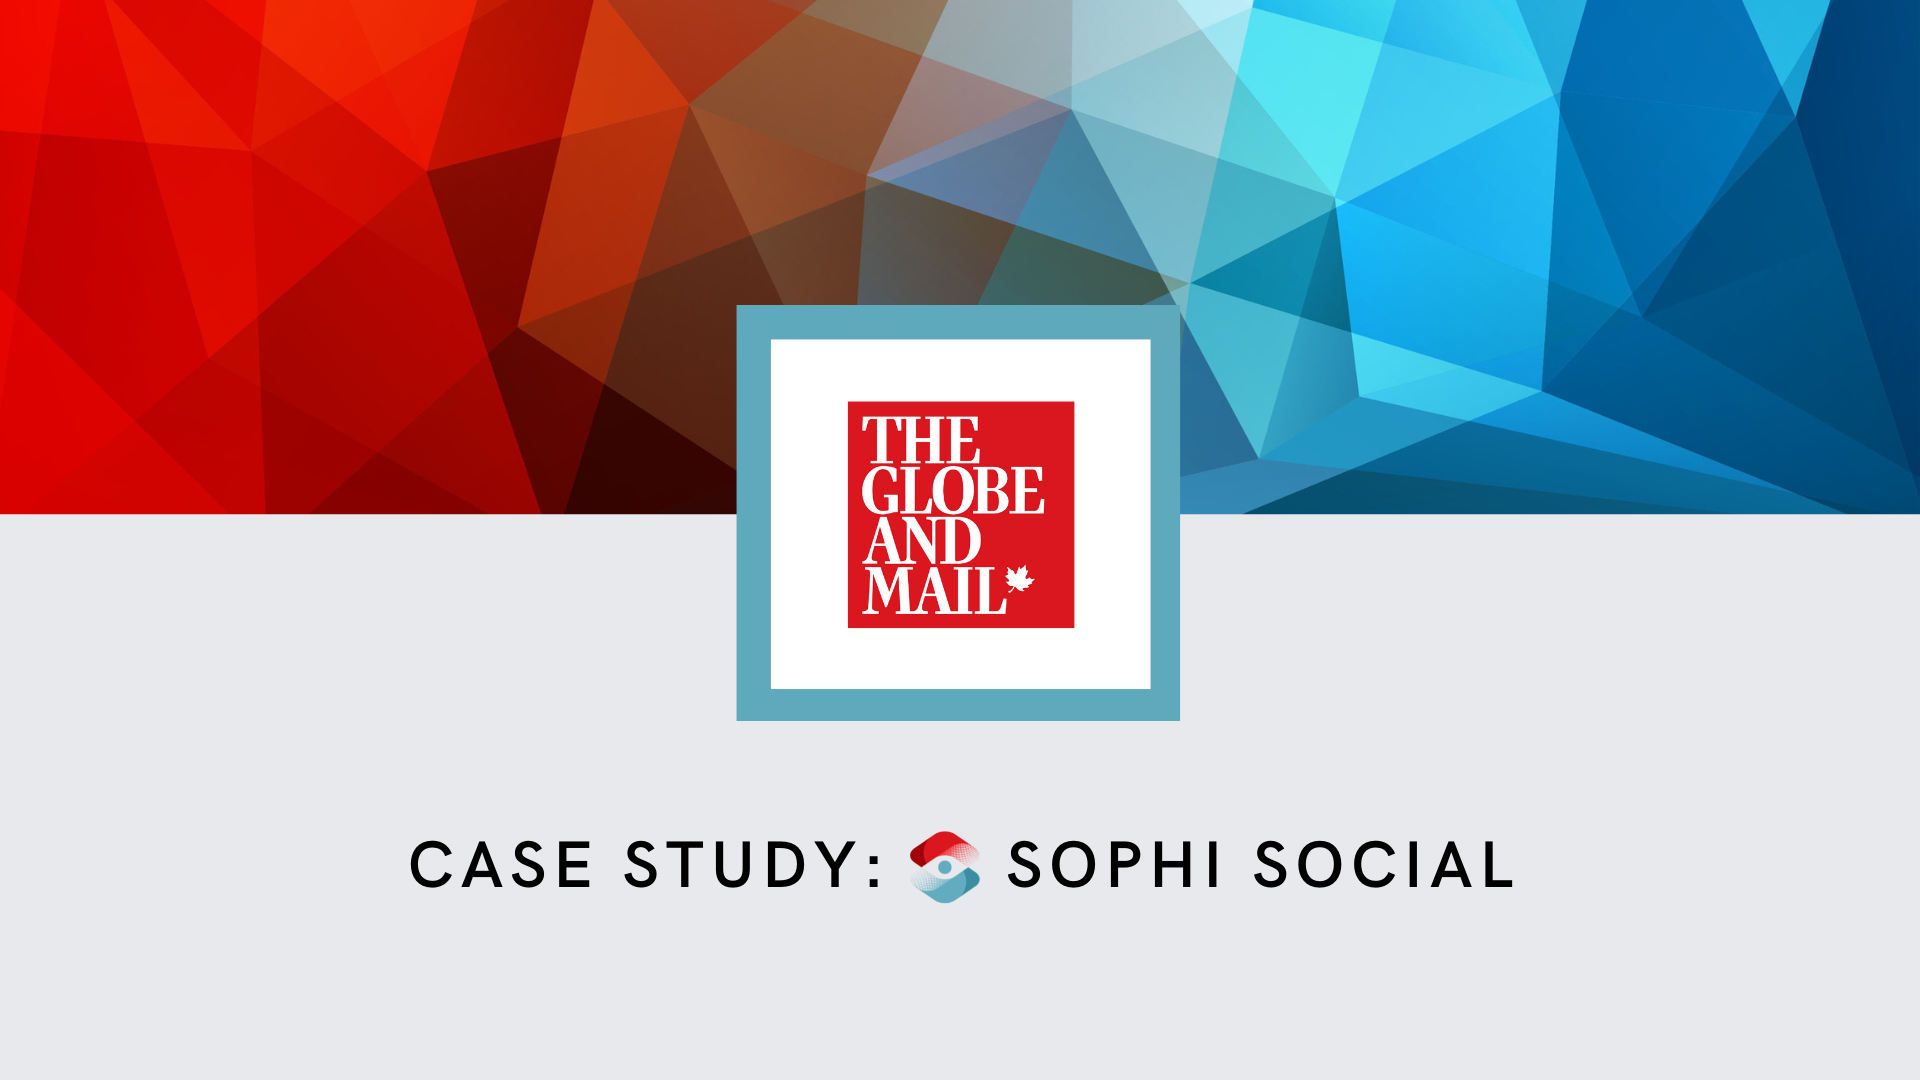 Case Study: The Globe and Mail and Sophi Social